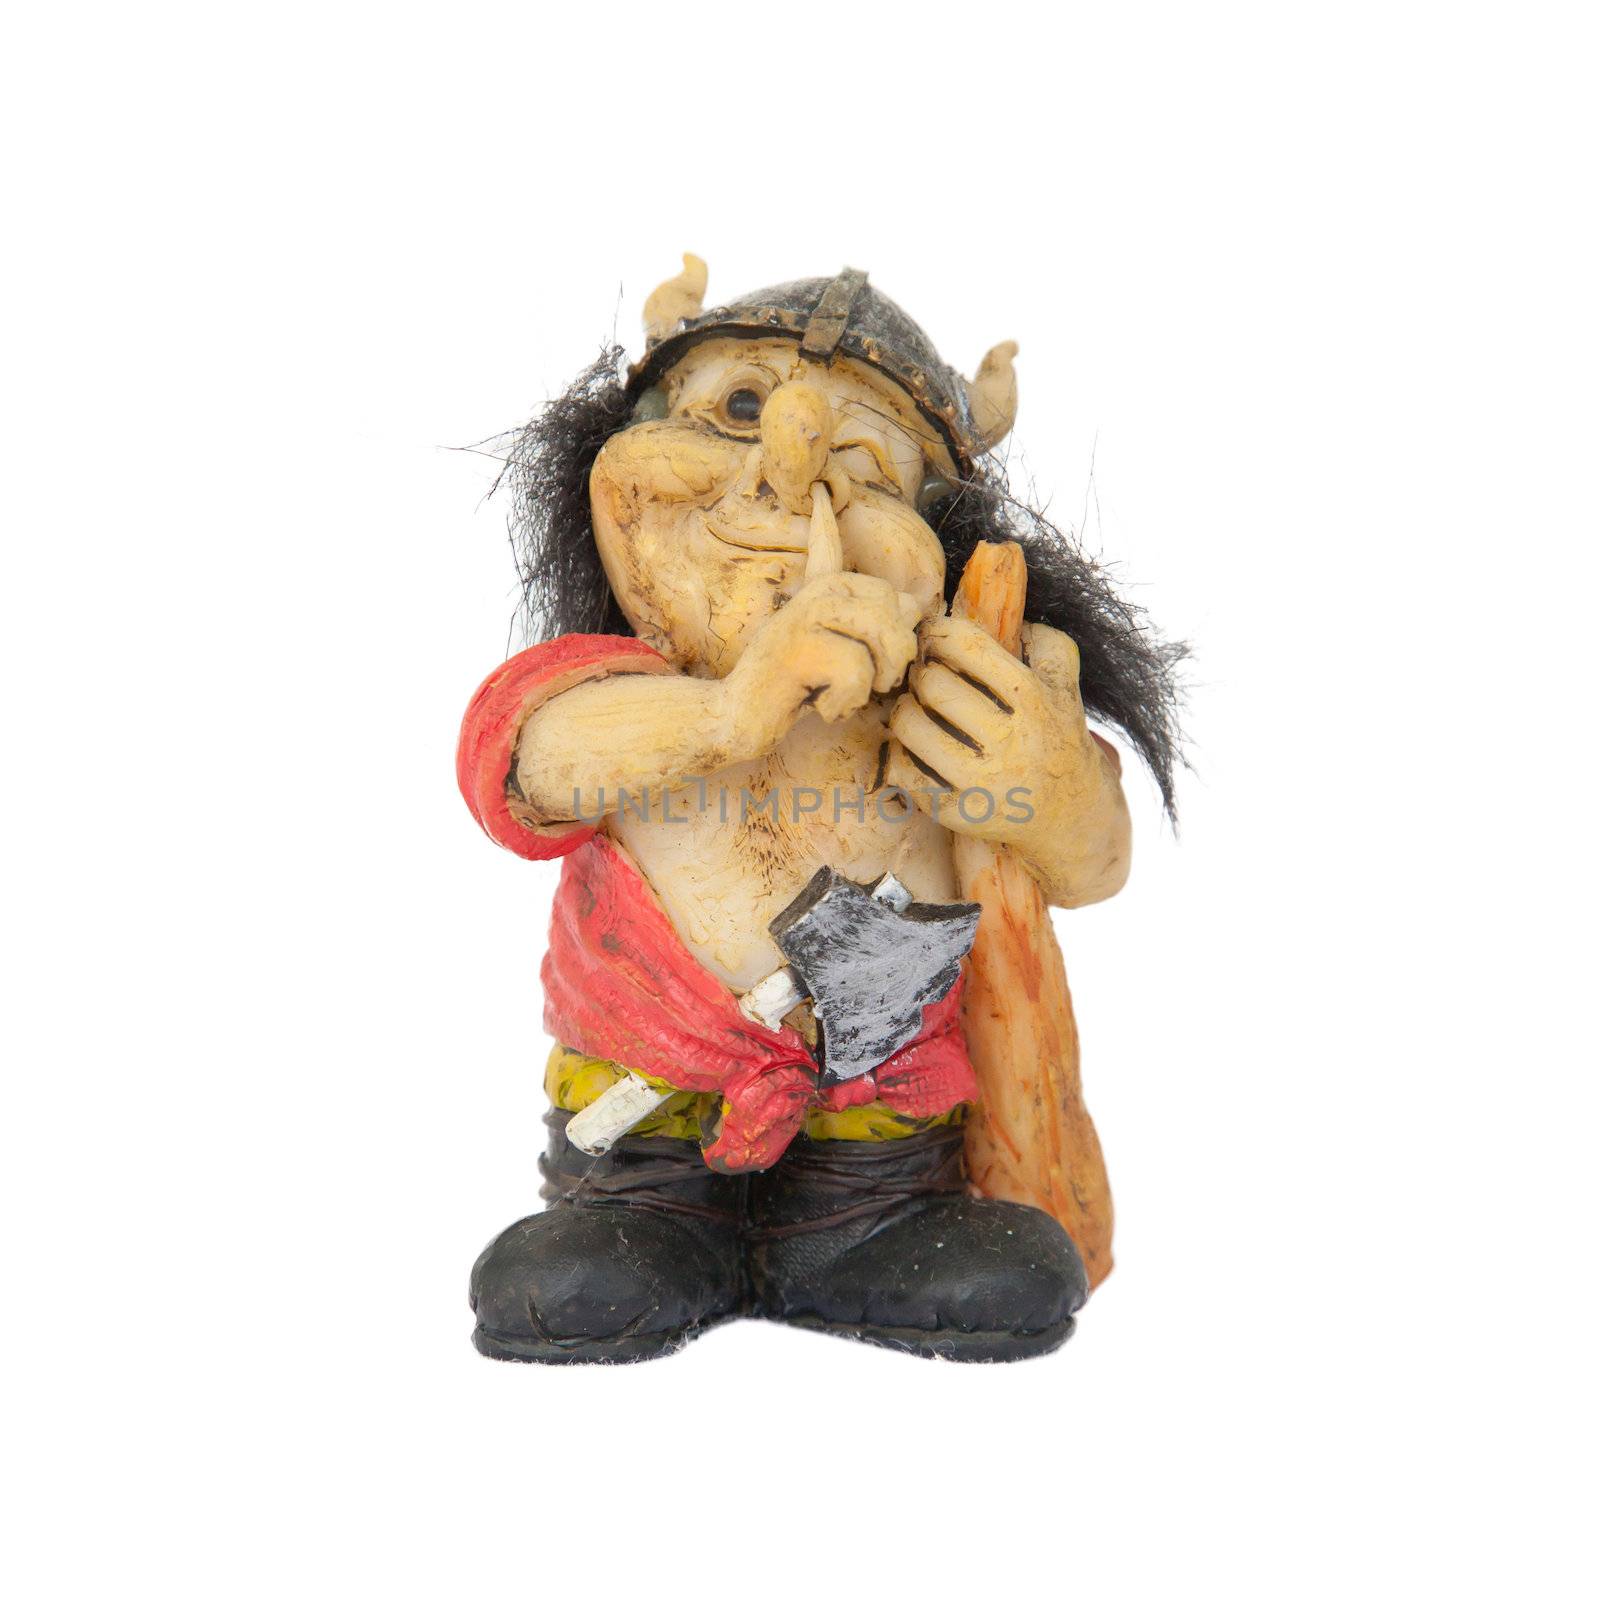 Small statue of a nosepicking troll by michaklootwijk